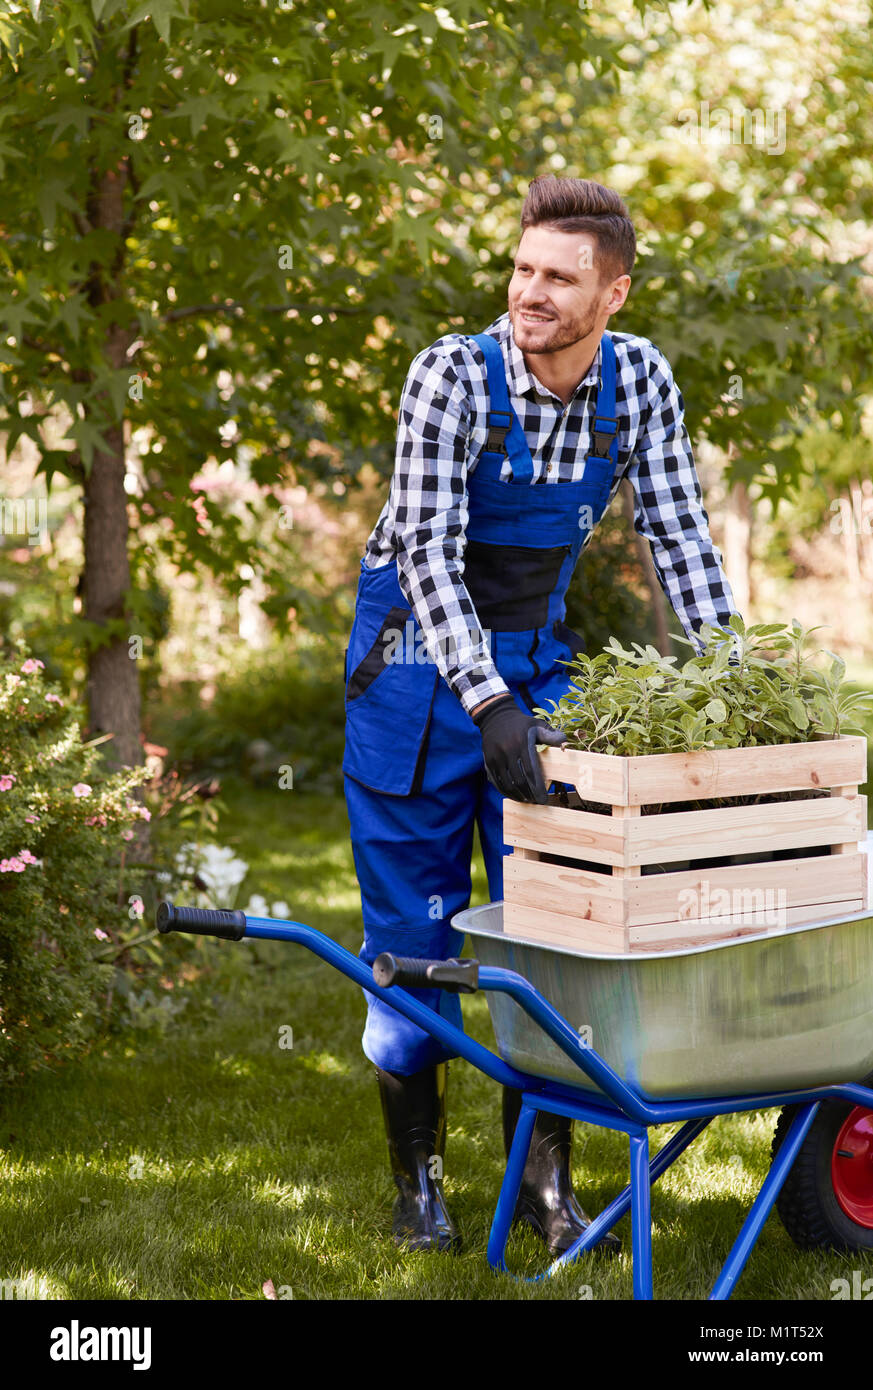 Gardener lifting wooden crate with seedling Stock Photo